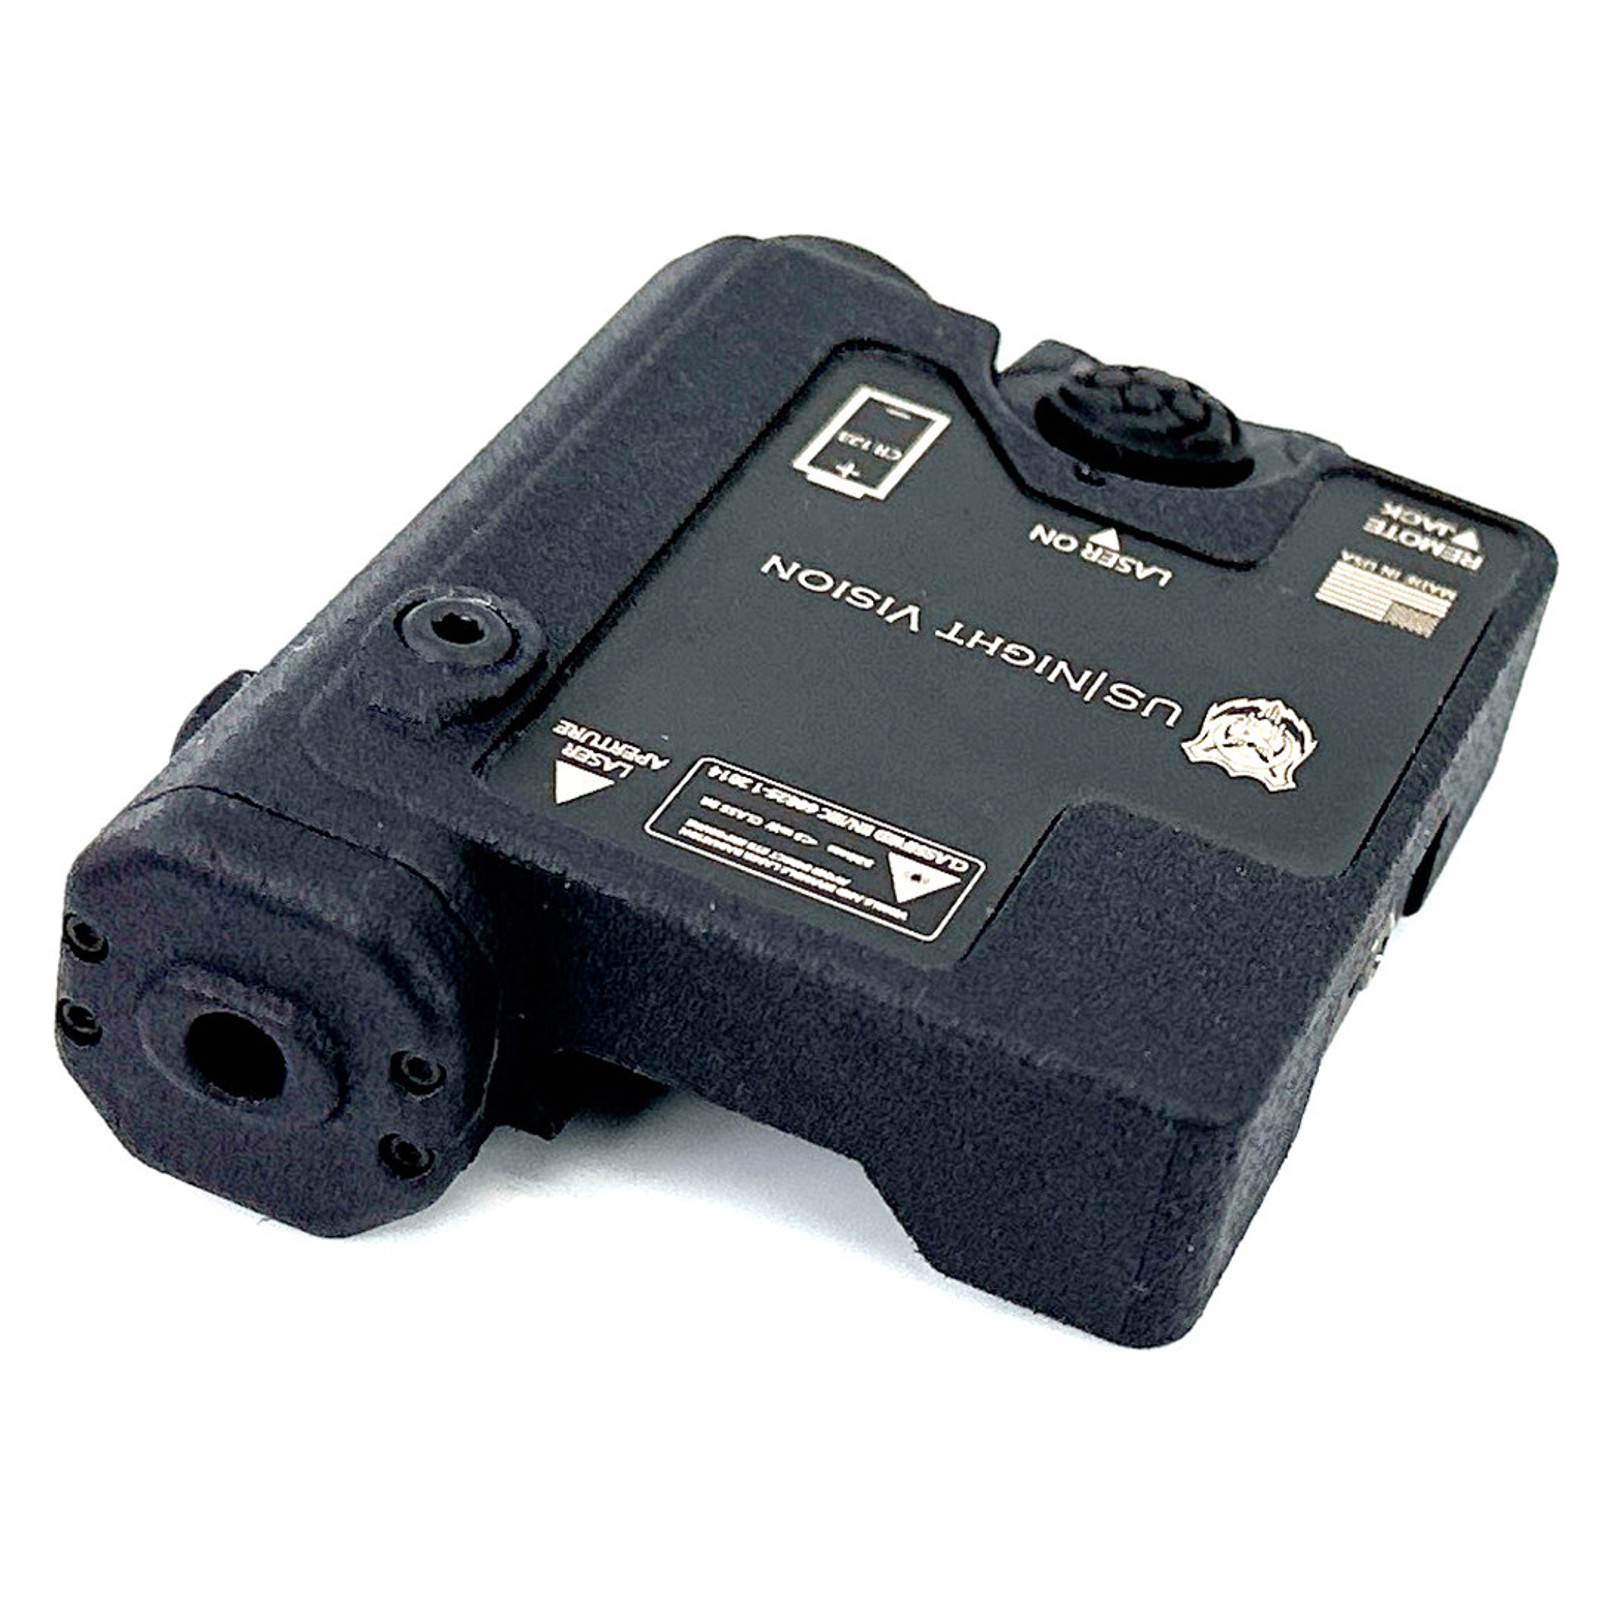 DIR-ONE Infrared Laser Aiming Device